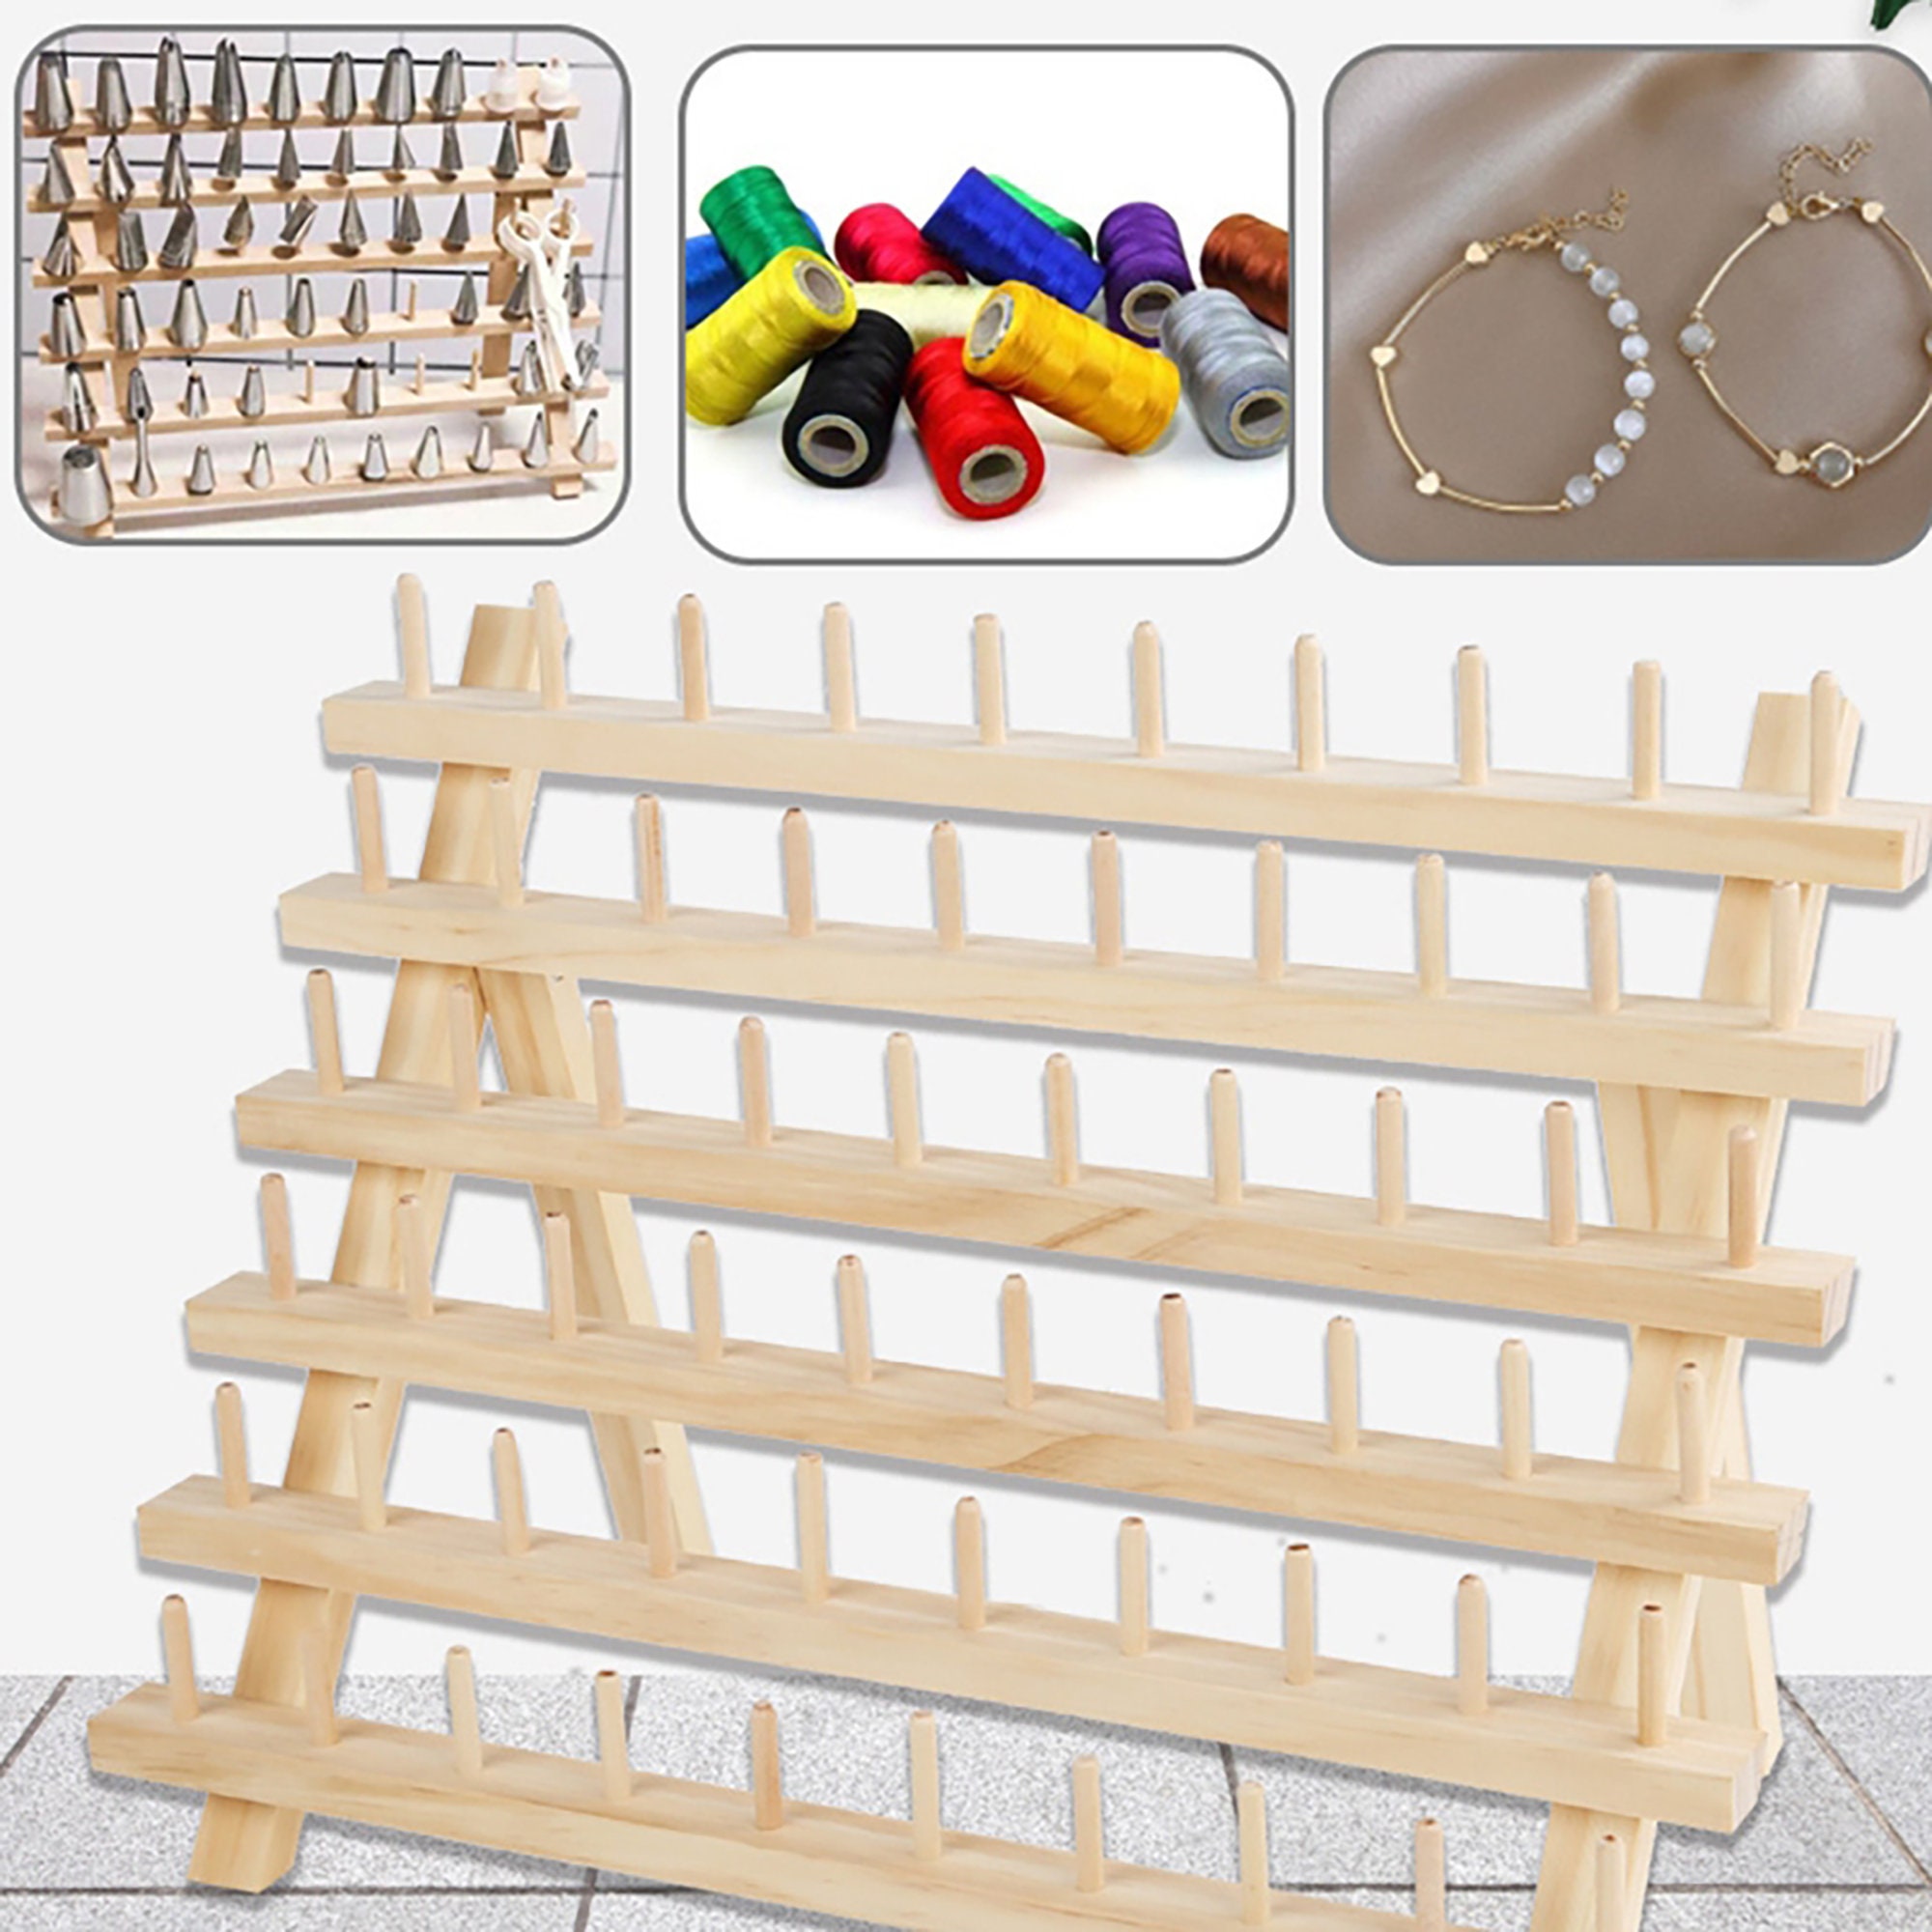 NW Wooden Thread Holder Sewing and Embroidery Thread Rack and Organizer  Thread Rack for Sewing with